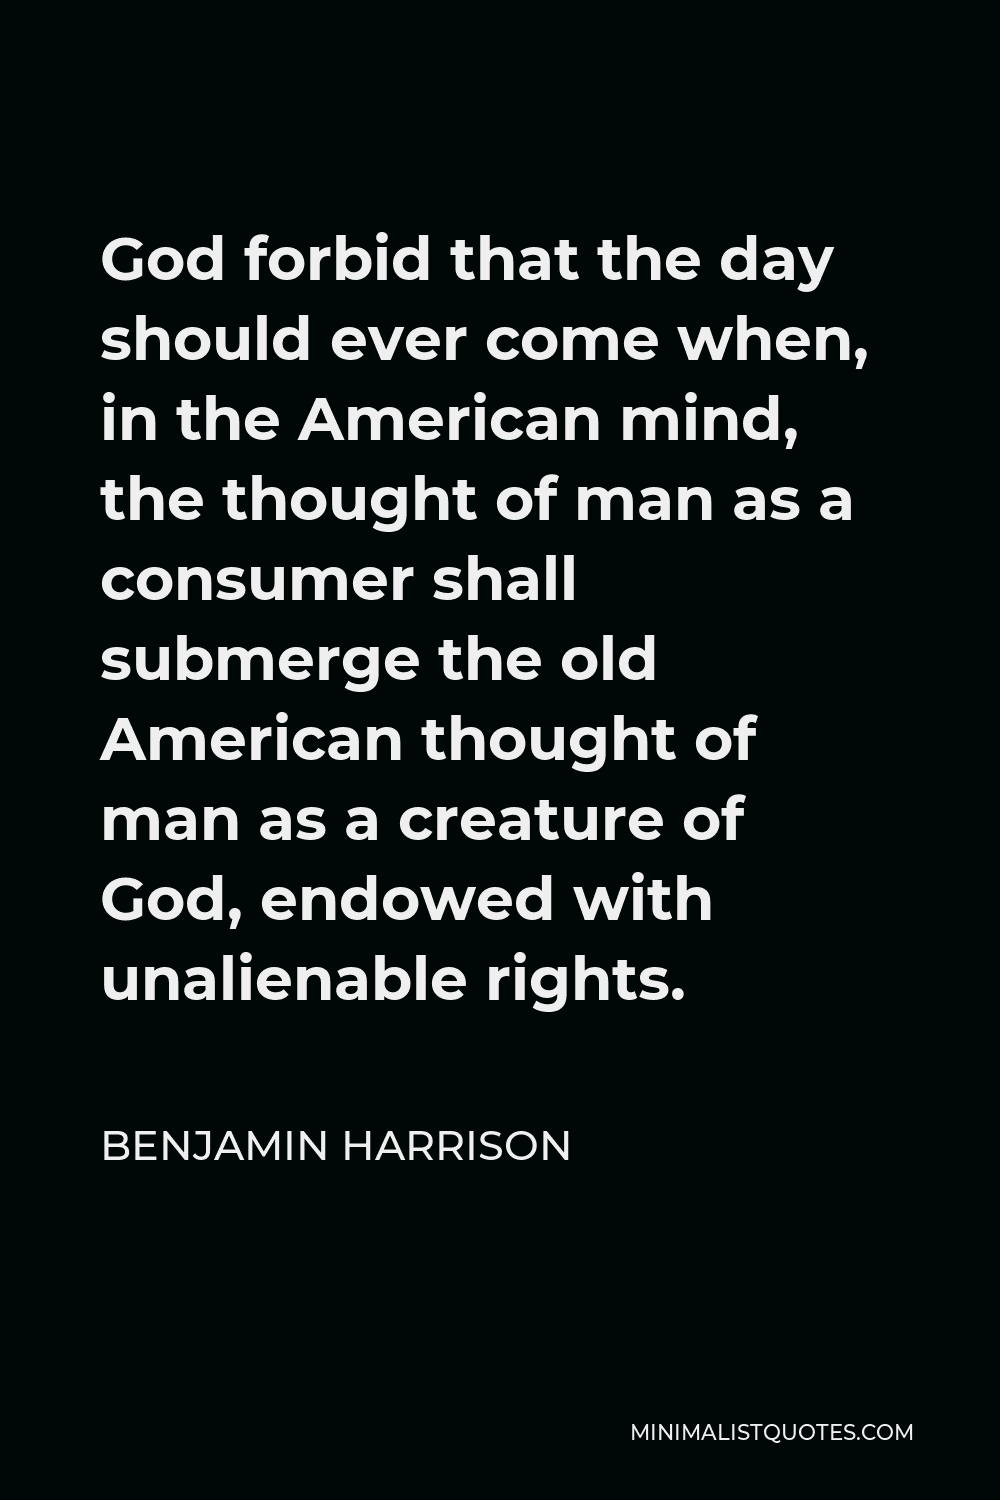 Benjamin Harrison Quote - God forbid that the day should ever come when, in the American mind, the thought of man as a consumer shall submerge the old American thought of man as a creature of God, endowed with unalienable rights.